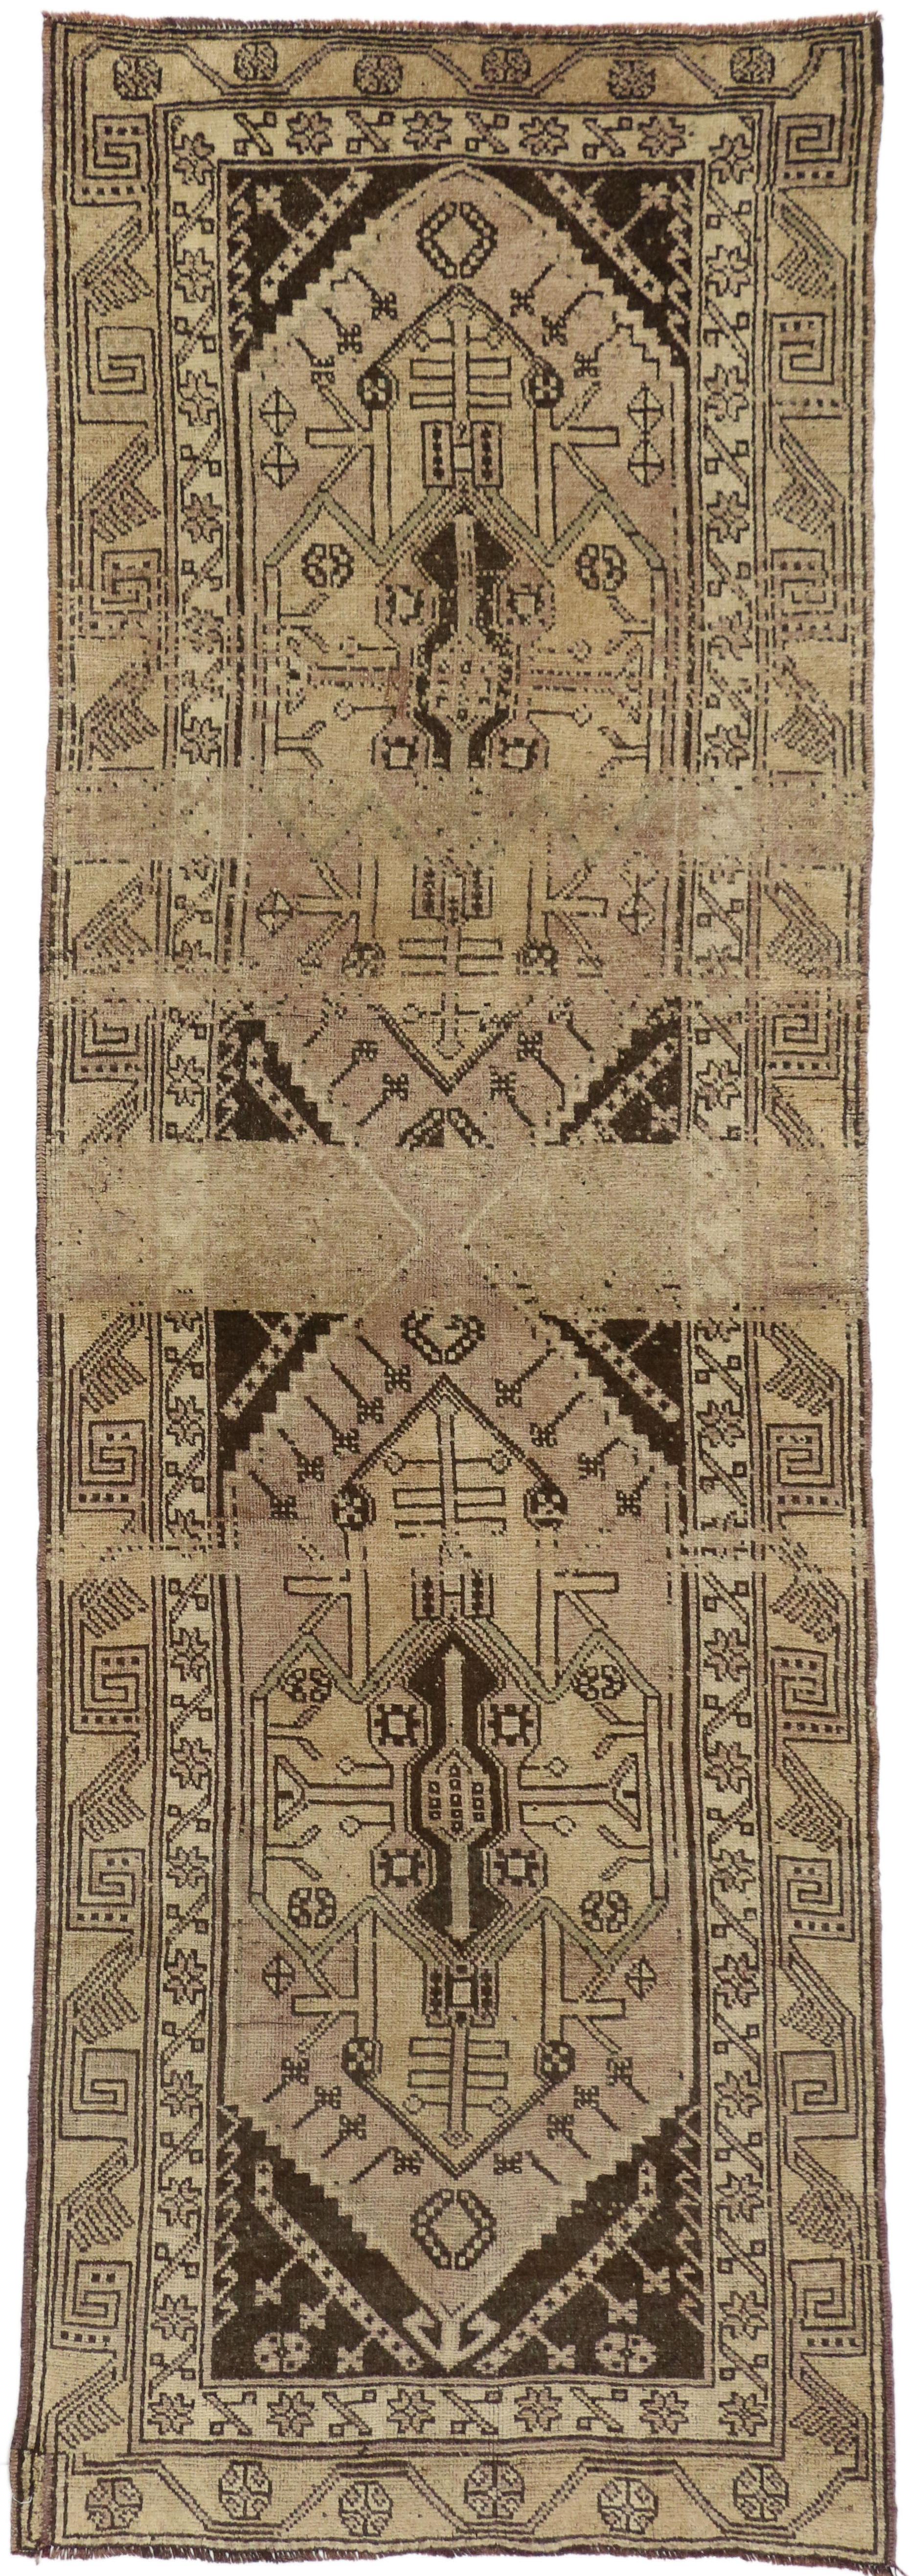 50749 Vintage Turkish Oushak Carpet Runner with Mid-Century Modern Style 03'06 x 10'07. Warm and inviting, this hand knotted wool vintage Turkish Oushak runner beautifully embodies Mid-Century Modern style. It features two large-scale mirrored